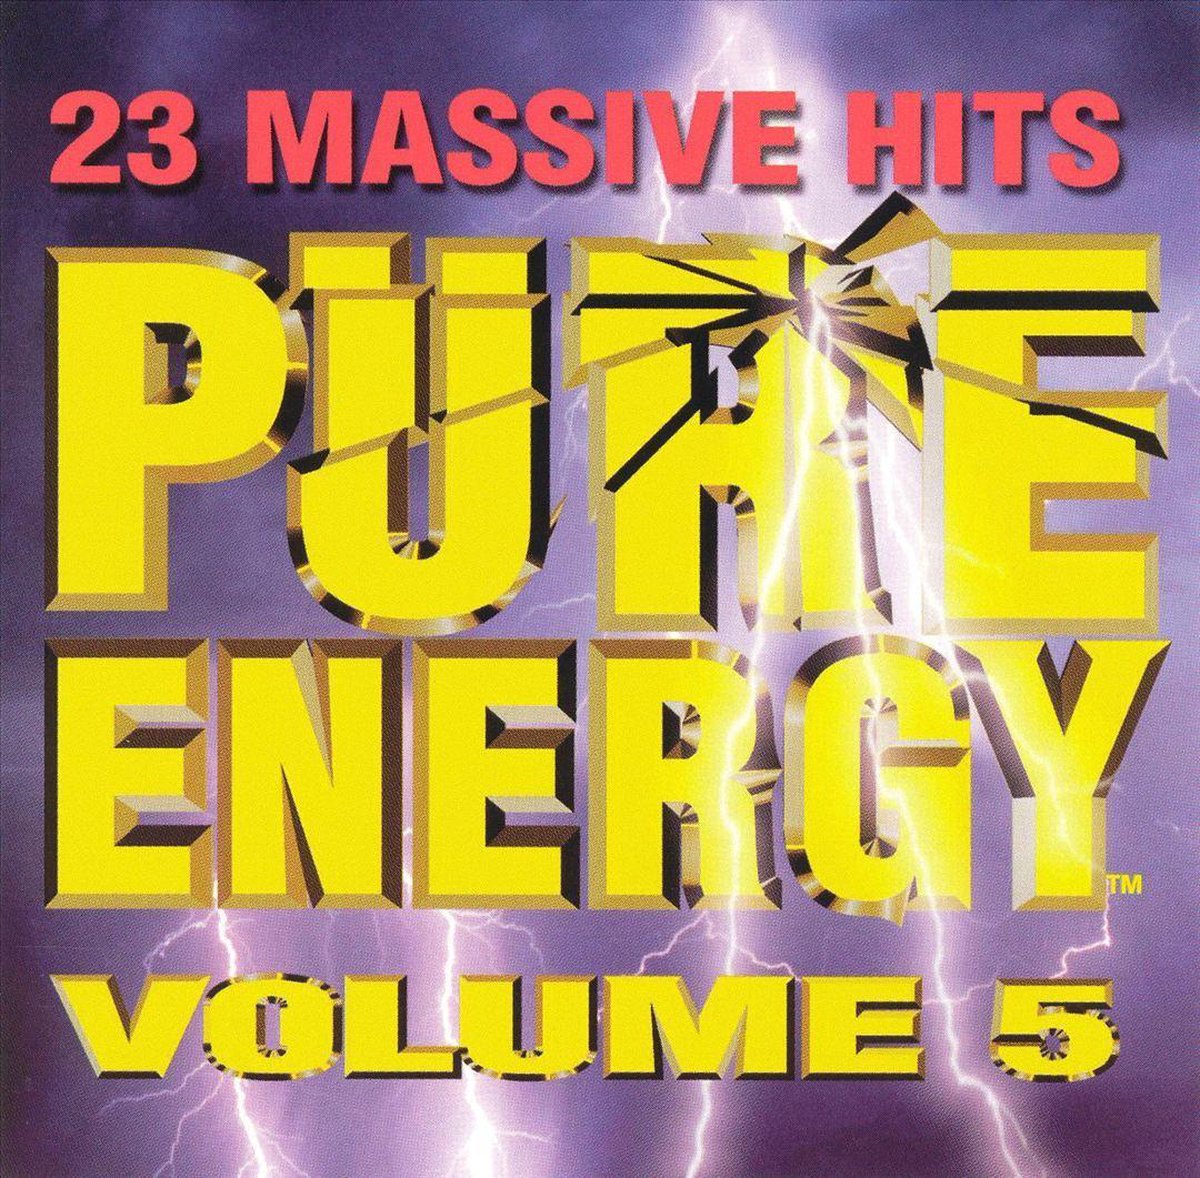 Pure Energy, Vol. 5 - various artists